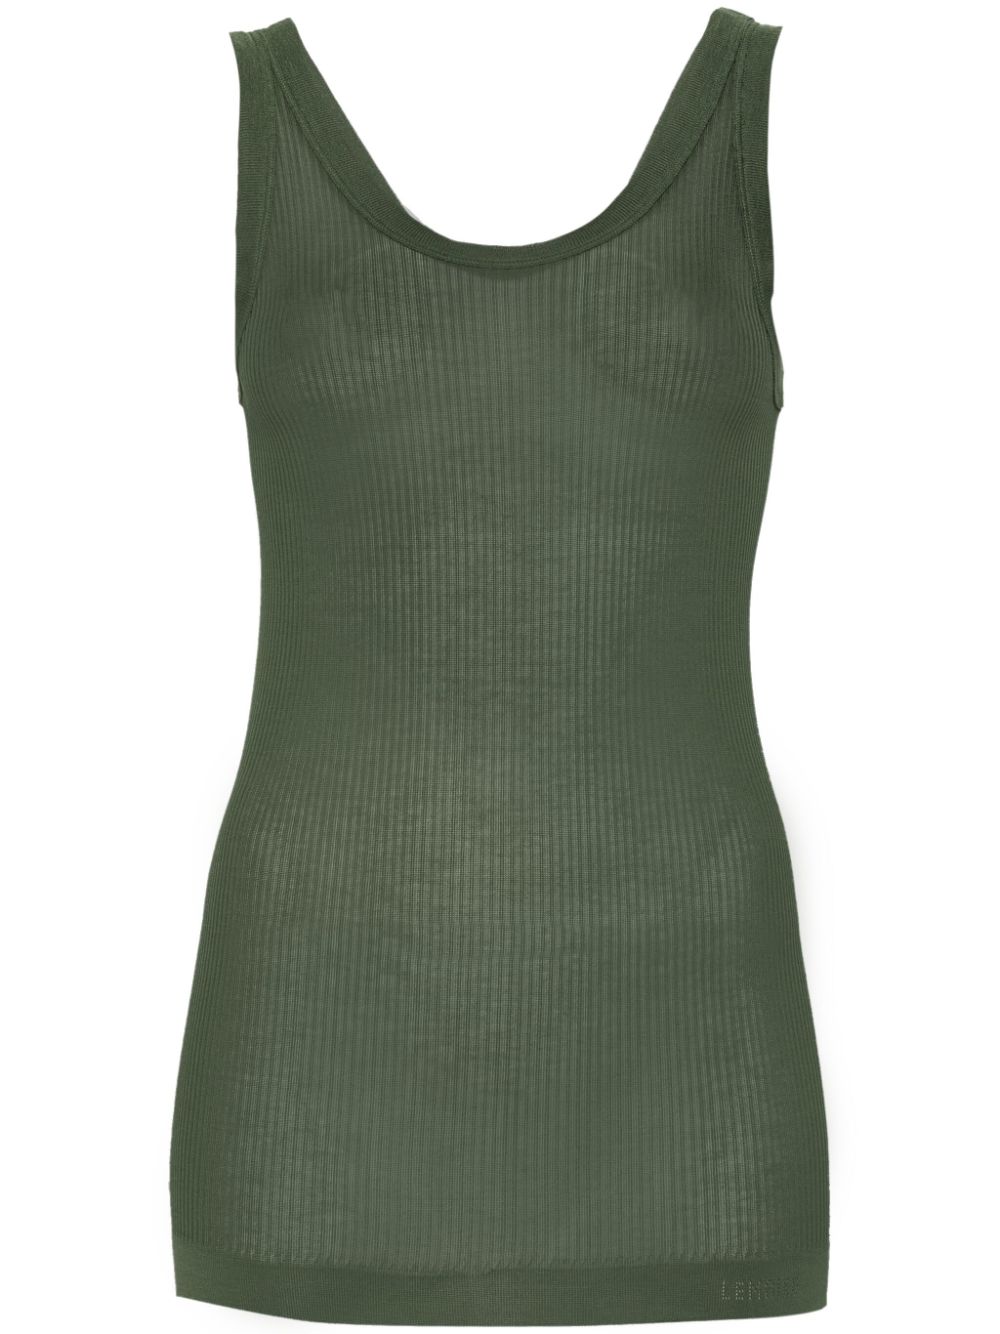 LEMAIRE semi-sheer tank top - Green von LEMAIRE